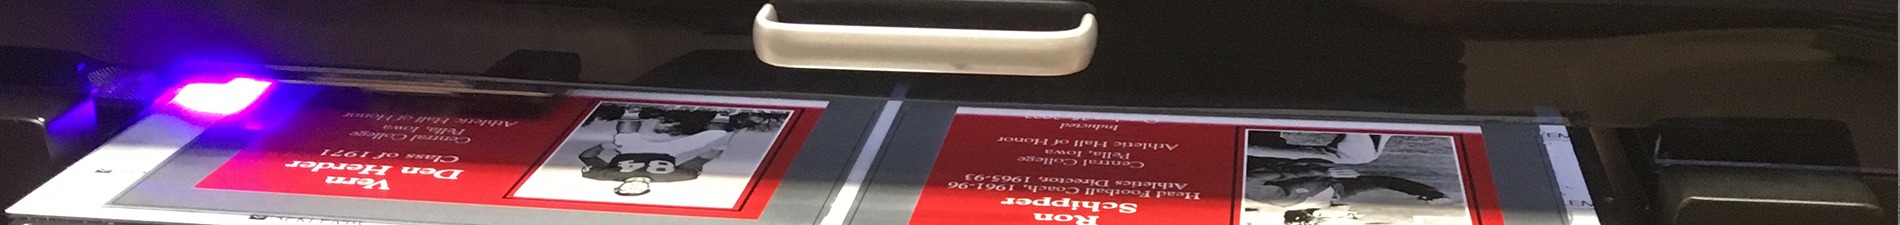 Header image of red plaques with black and white photos coming out of UV printer